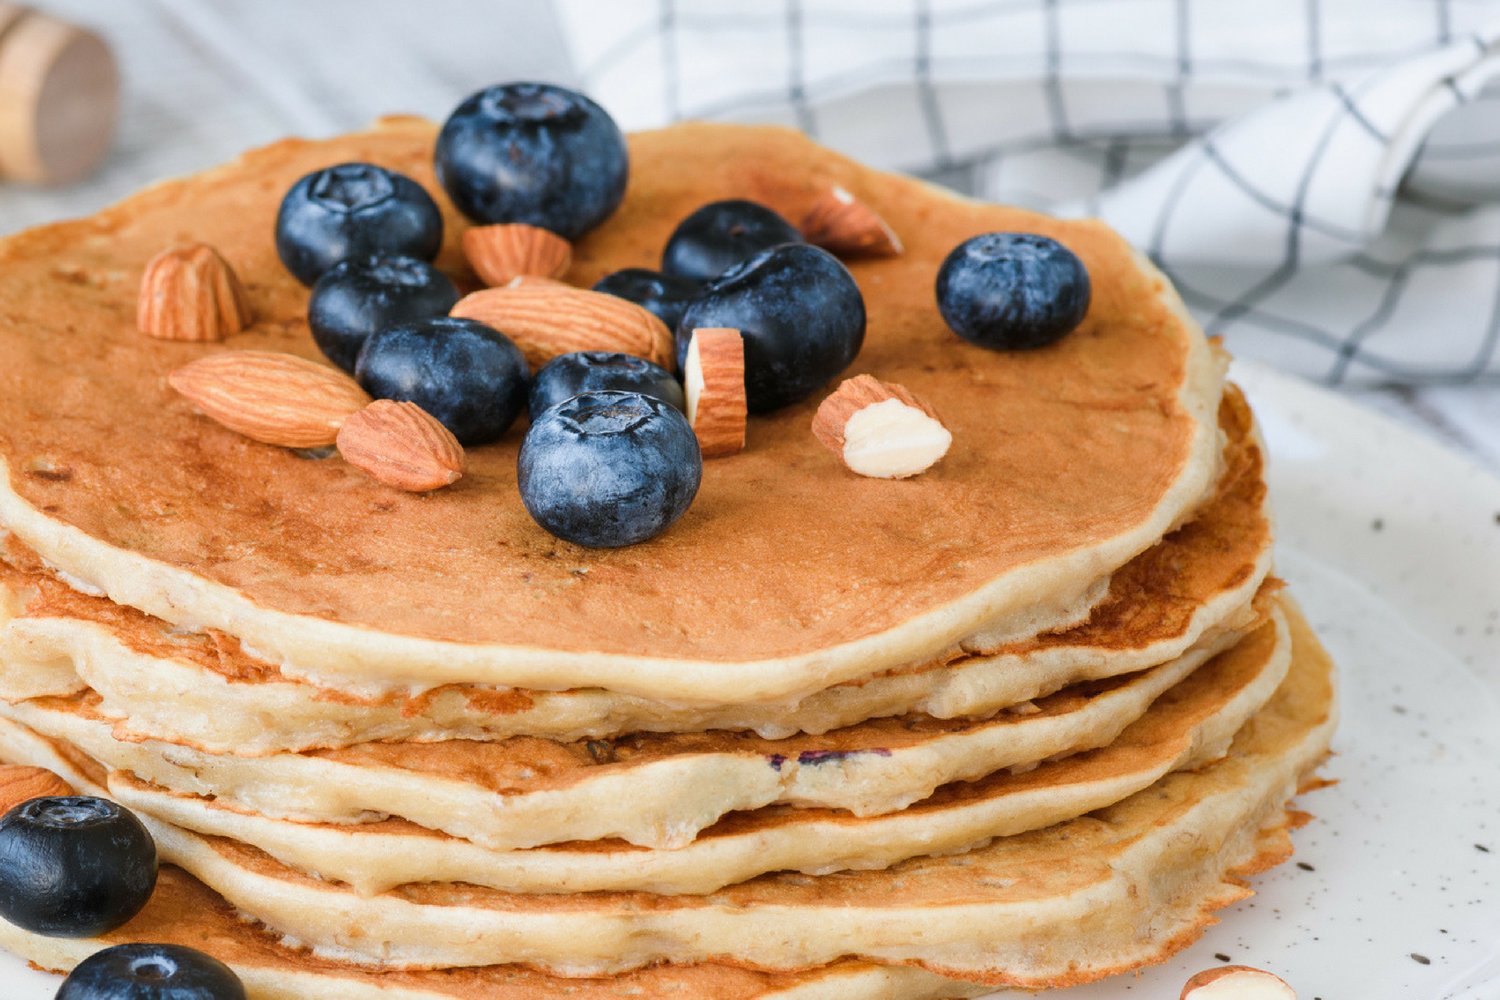 Low carb almond flour pancakes with blueberries and almonds on a white plate.